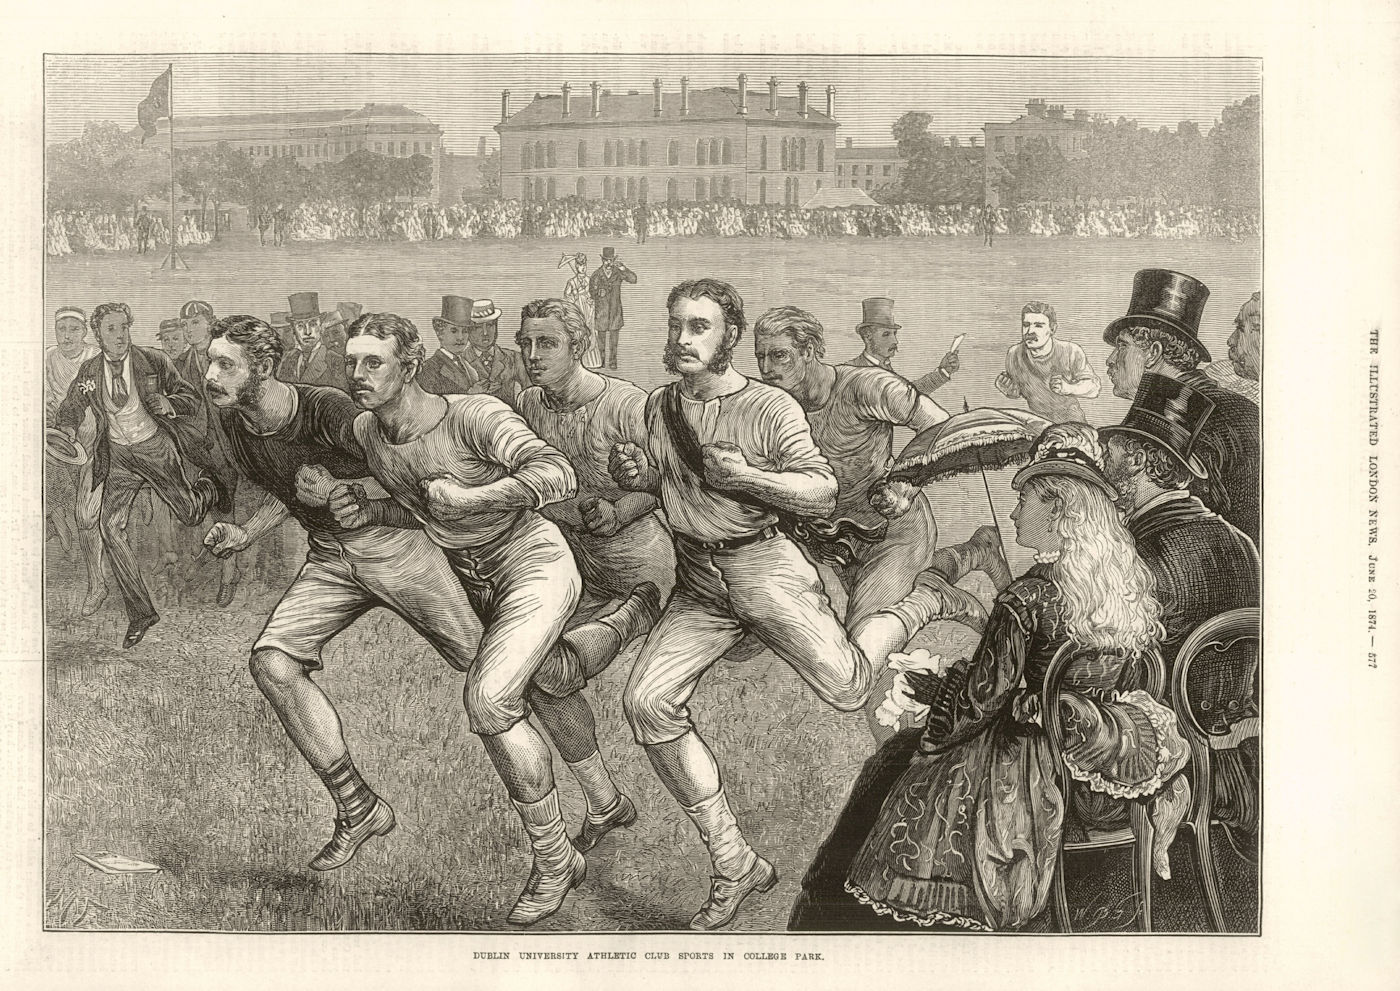 Dublin University Athletic club sports in College Park. Ireland 1874 old print